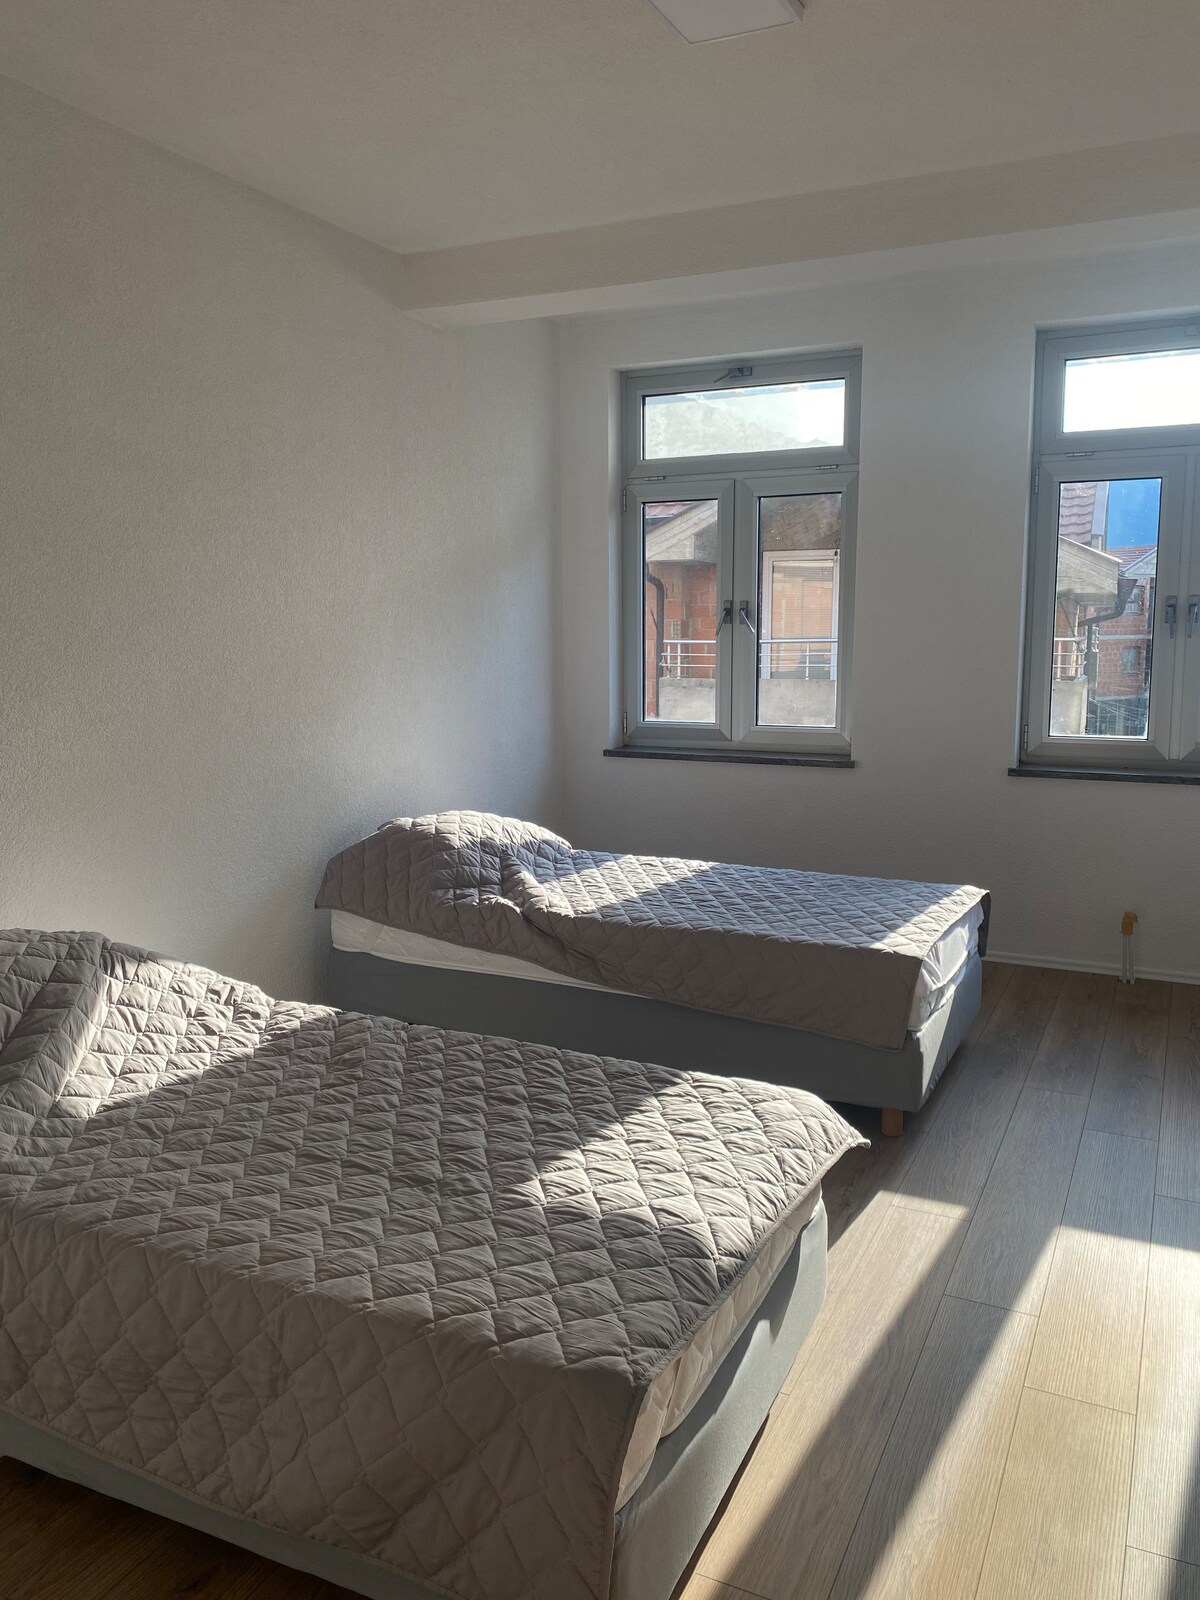 Rooms for rent near city center